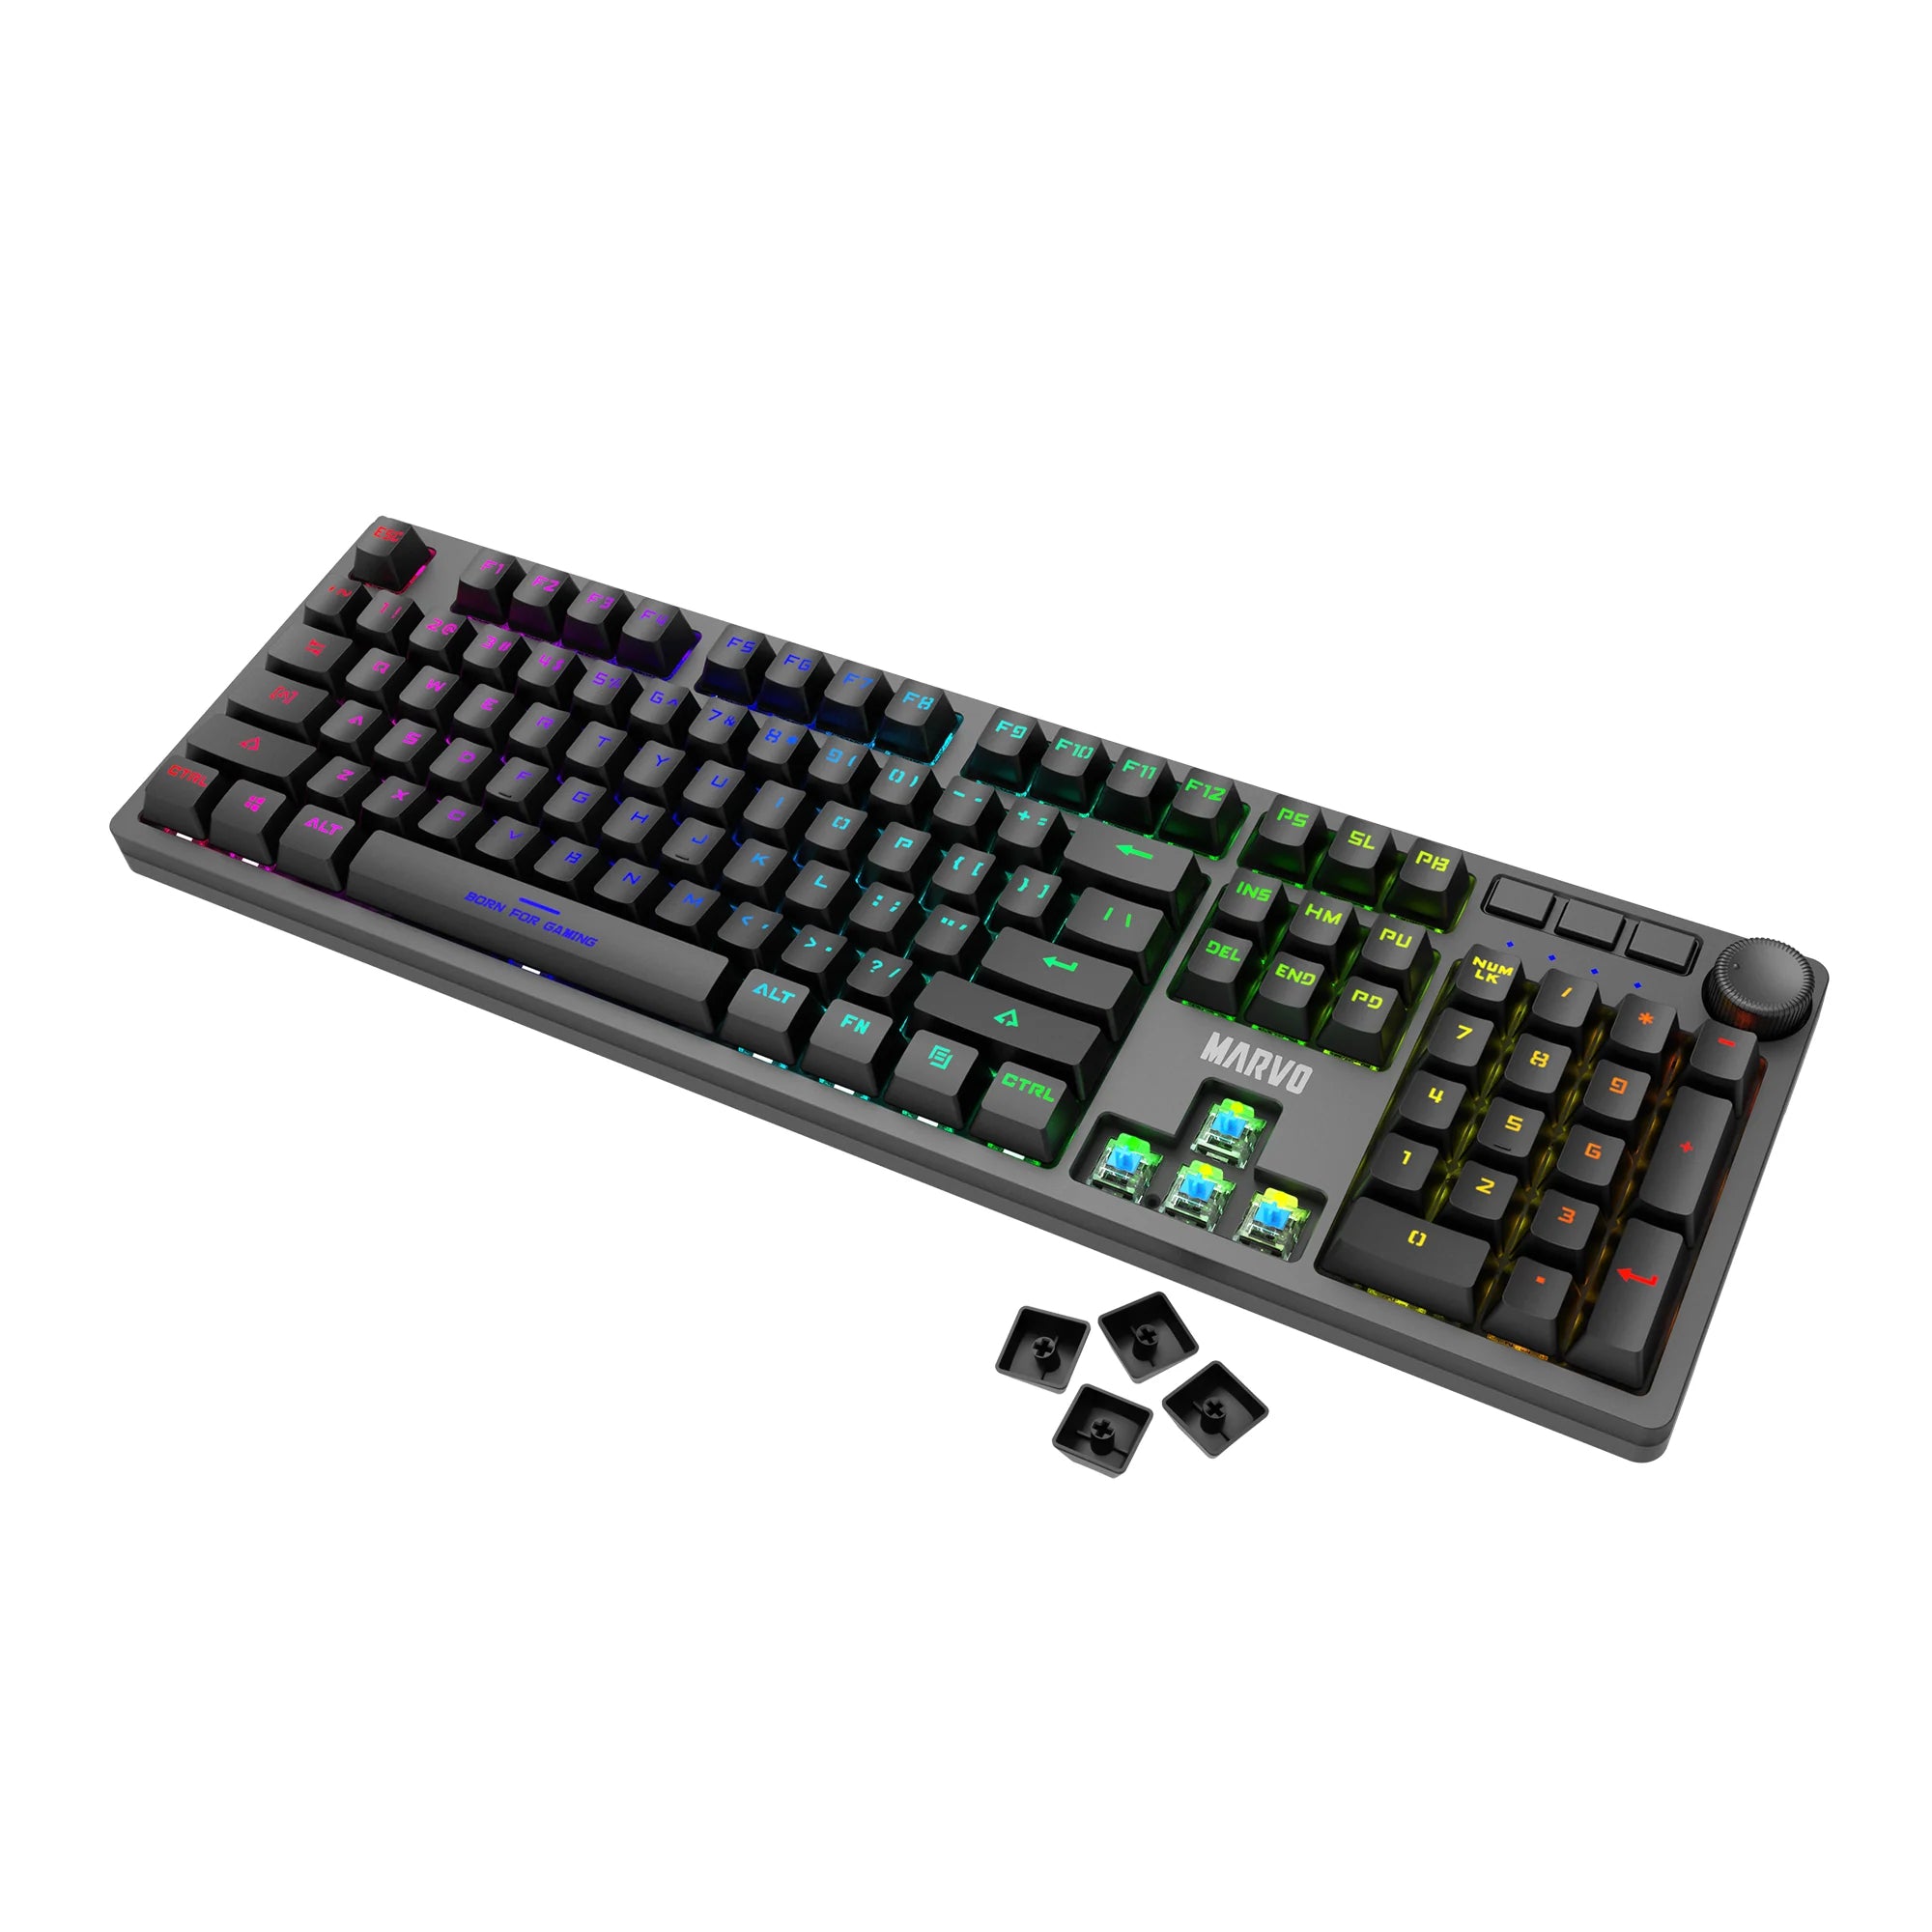 KG954 Full Size Mechanical Gaming Keyboard with Detachable USB Type-C Cable